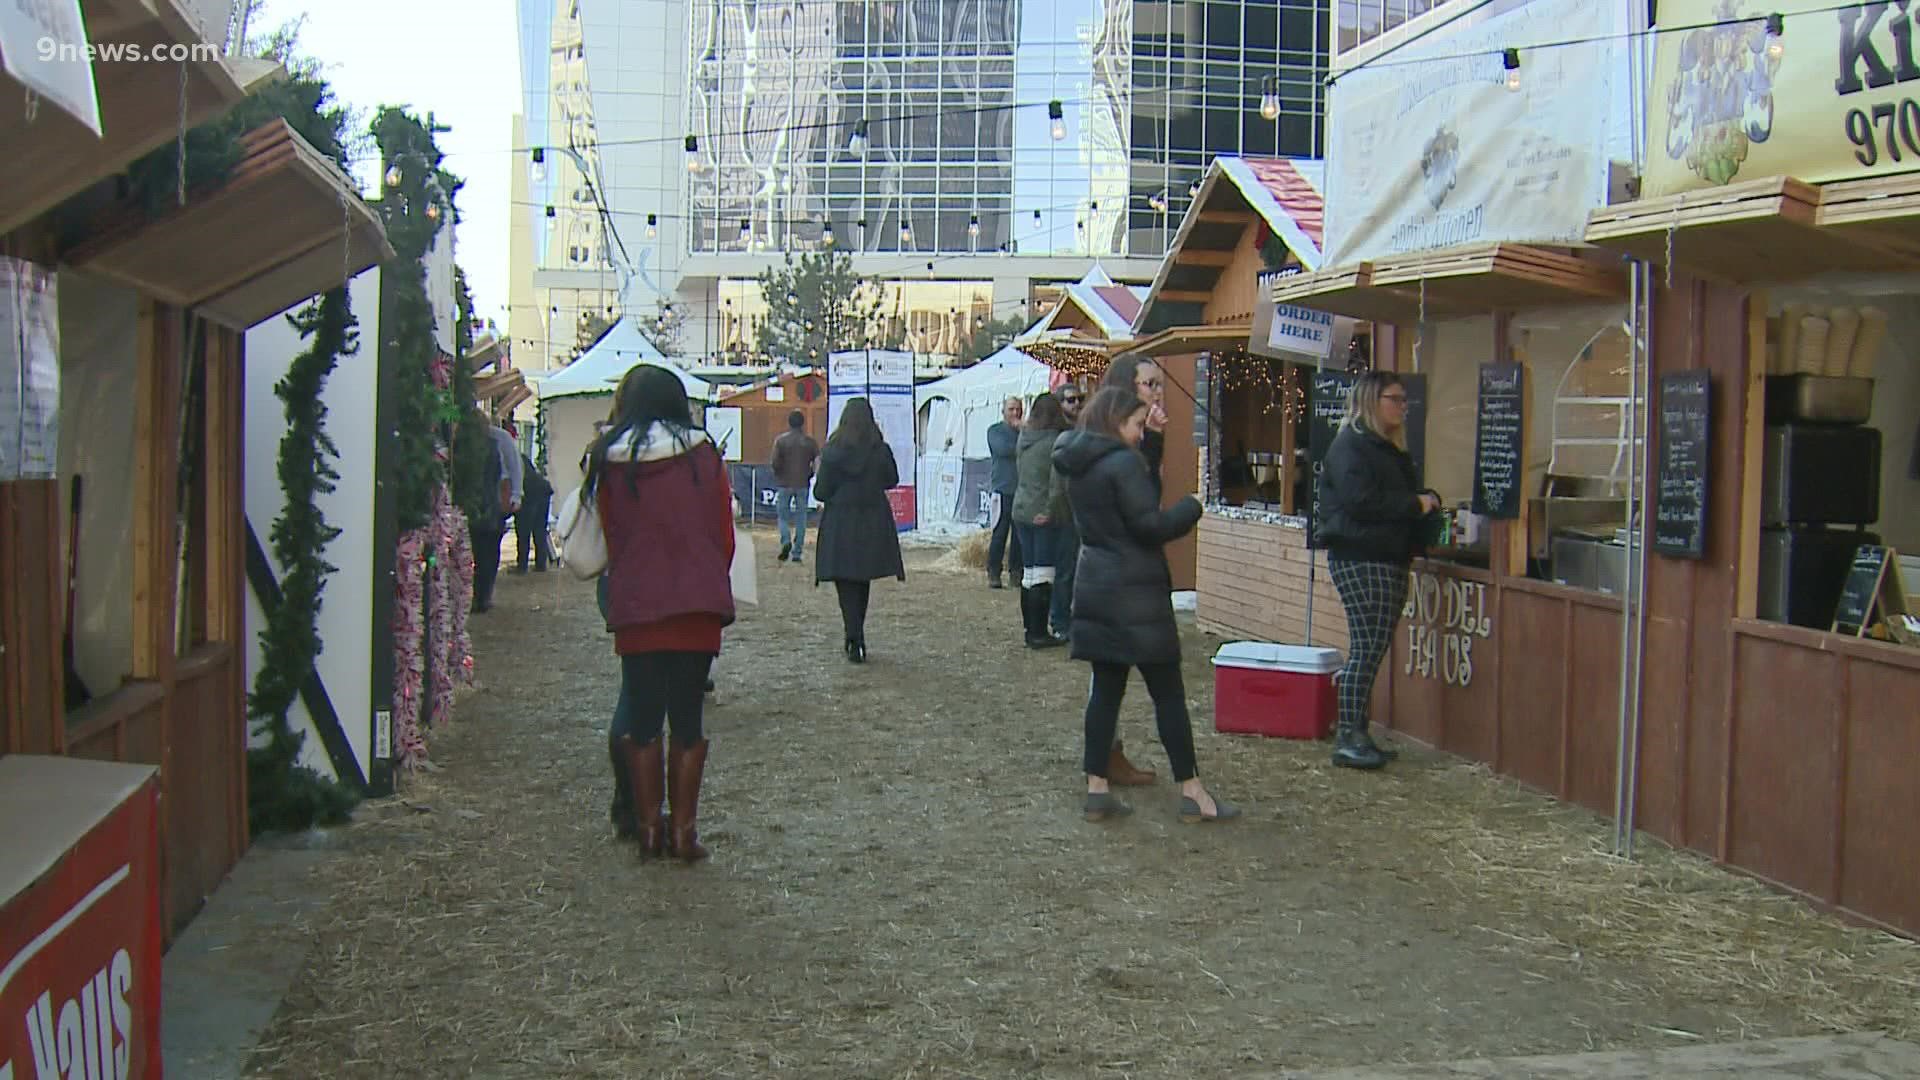 The German holiday market is open daily now through Dec. 23 at at Civic Center Park in downtown Denver.